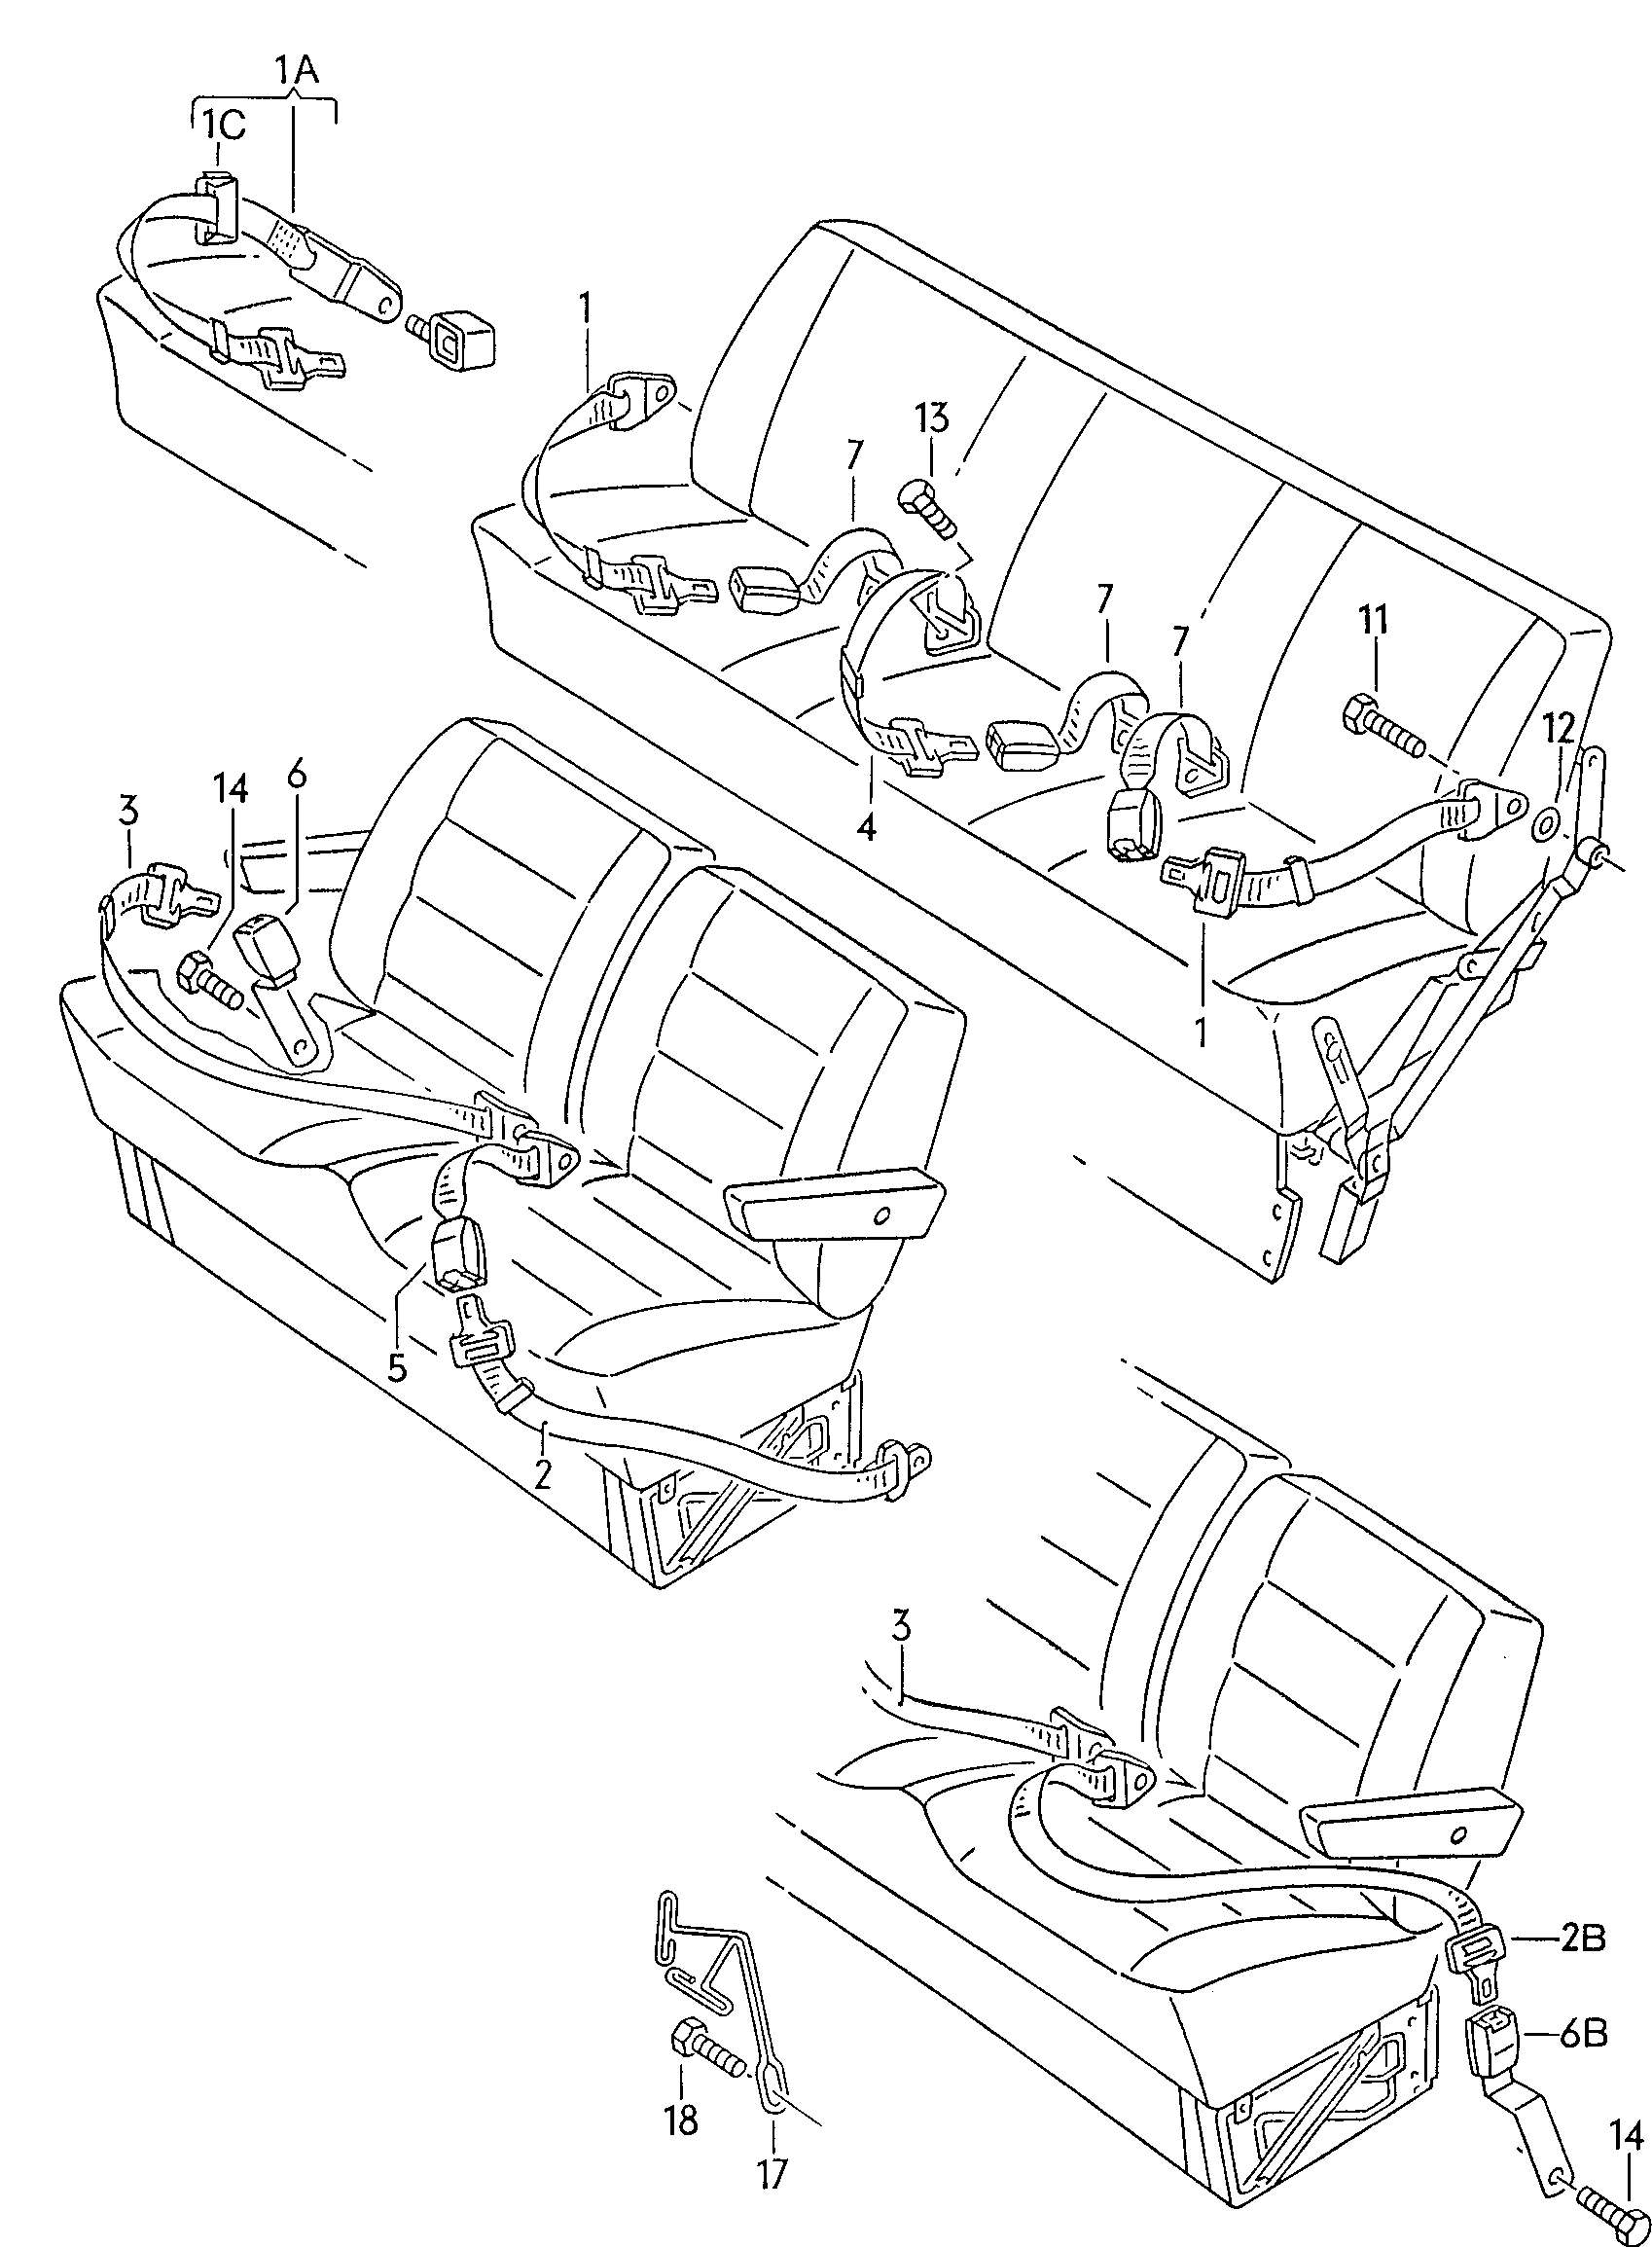 Lap belts in passenger<br>compartmentfor vehicles with 3-seat<br>foldable bench seat, rear, and<br>2-seat, foldable backrest<br>for front bench seat  - Typ 2/syncro - t2